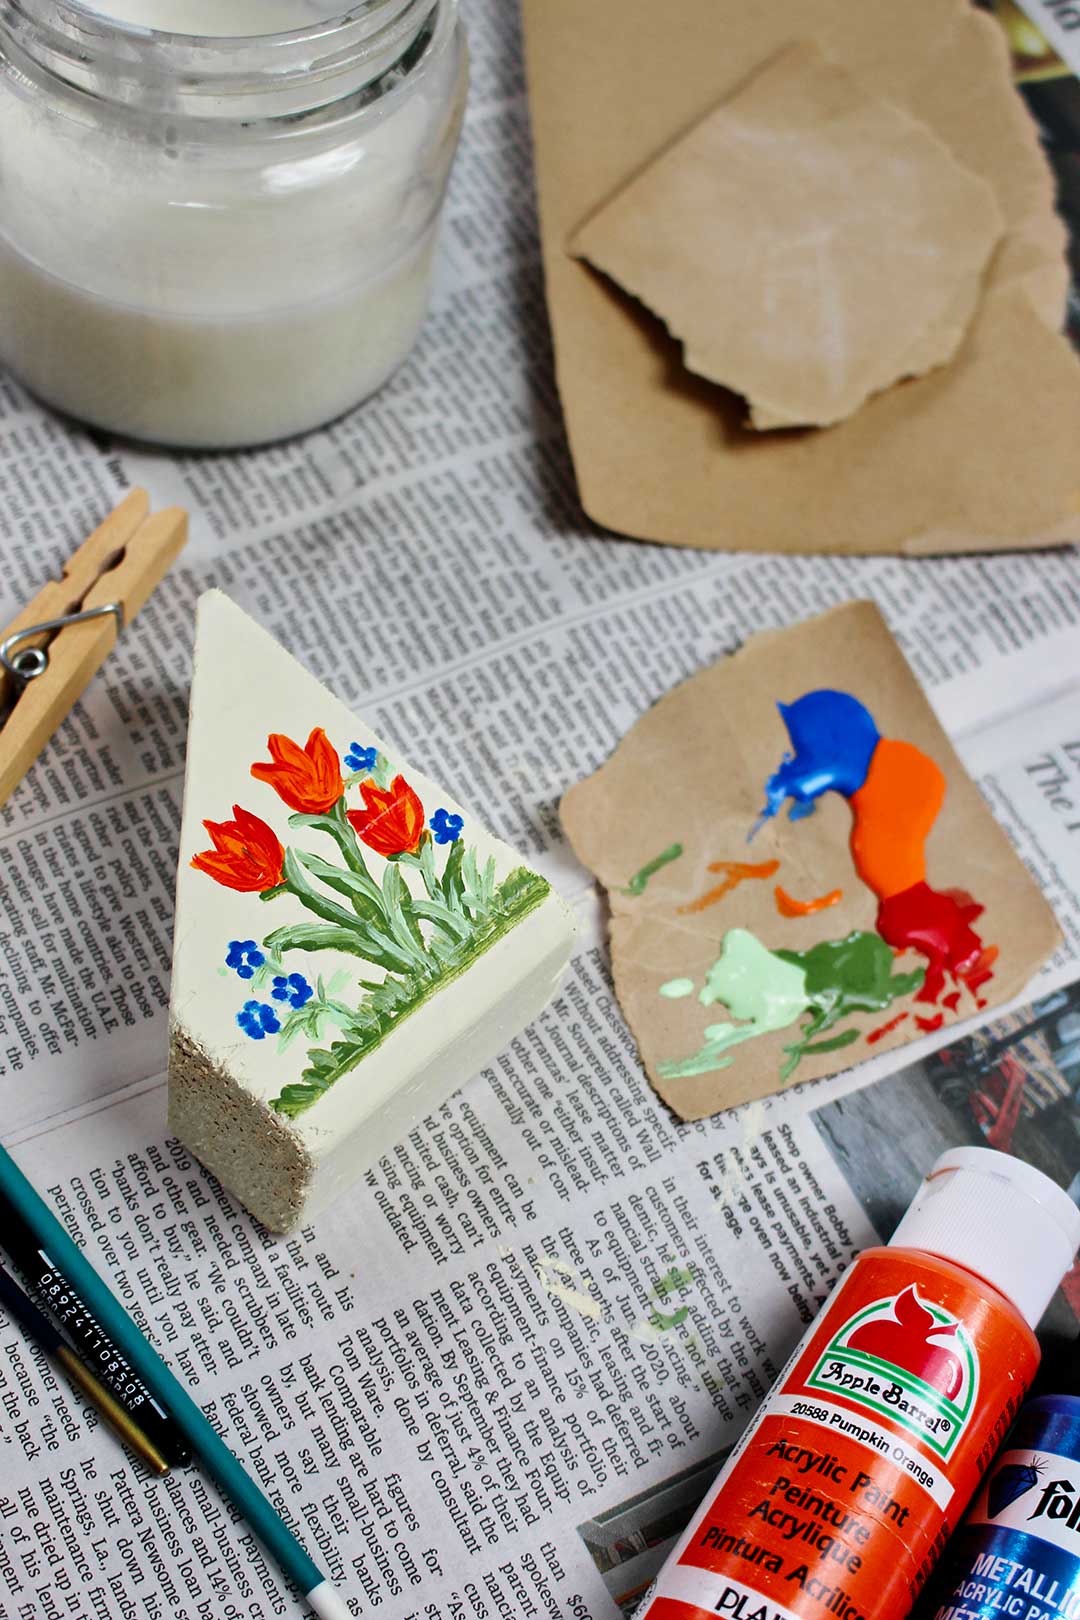 Completed recipe card block painted with red tulips.